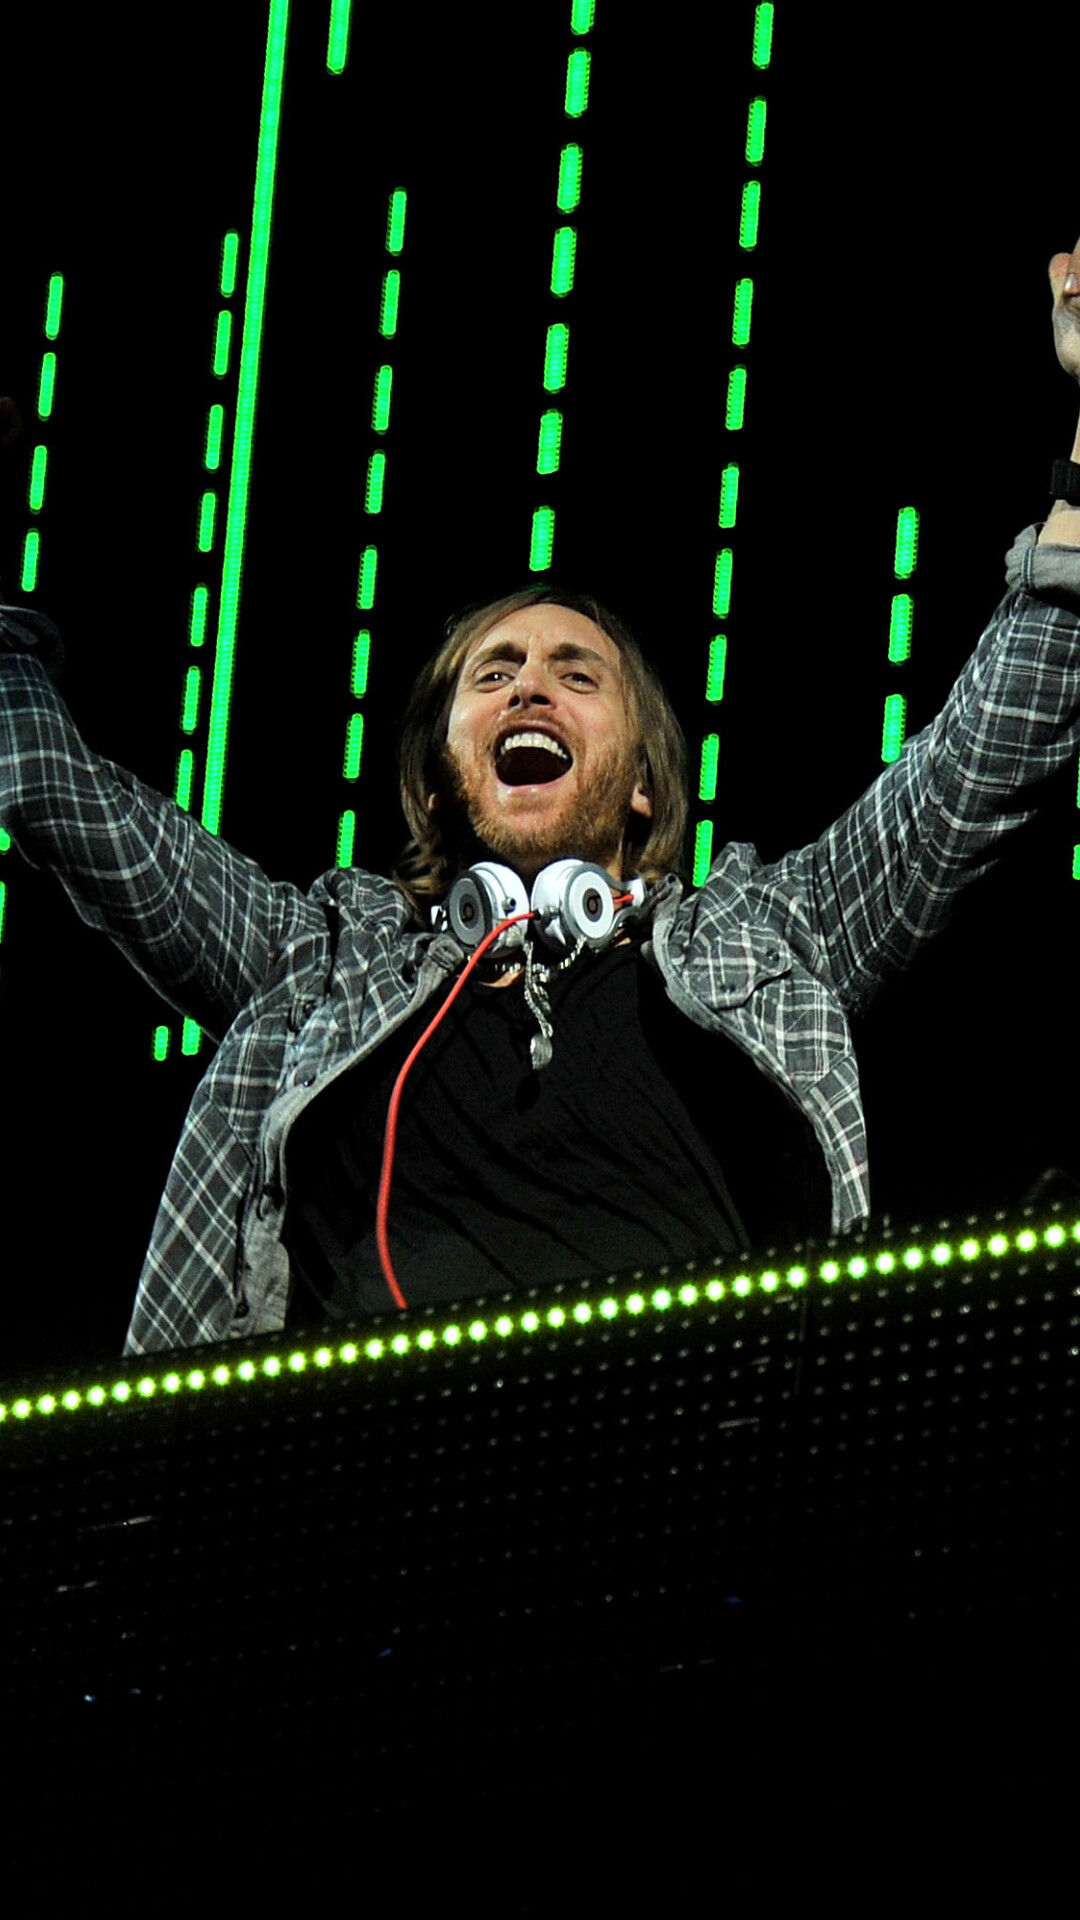 David Guetta: The pioneer of French house, Up and Way, a garage-style track with vocals by Robert Owens, Released in 1992. 1080x1920 Full HD Background.